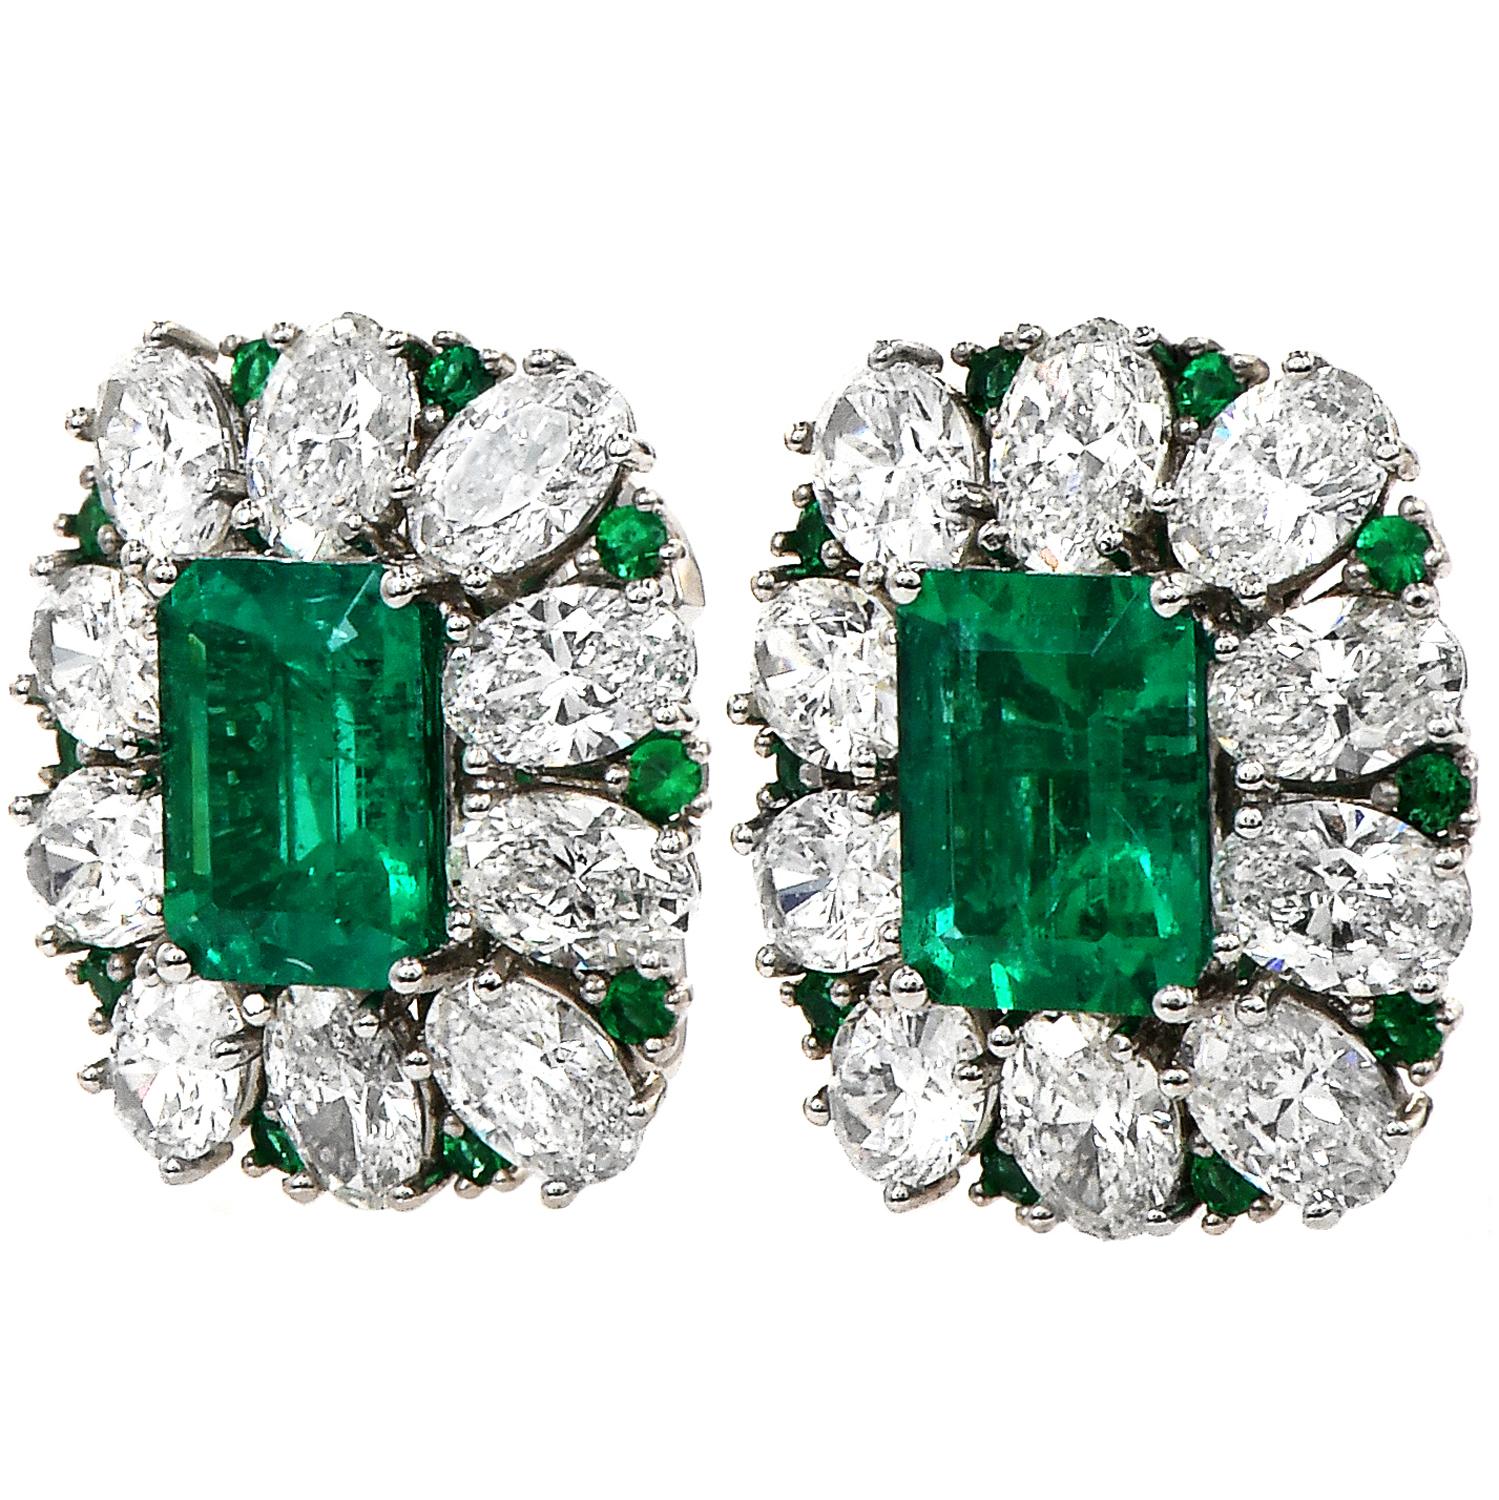 A highly sparkly contrast with a vivid green Emerald and Diamond to appeal the heart to all emerald lovers.

Is crafted in solid platinum.

Each center exposes an exquisite Green Emerald, square Colombian emerald Cut, prong Set, weighing